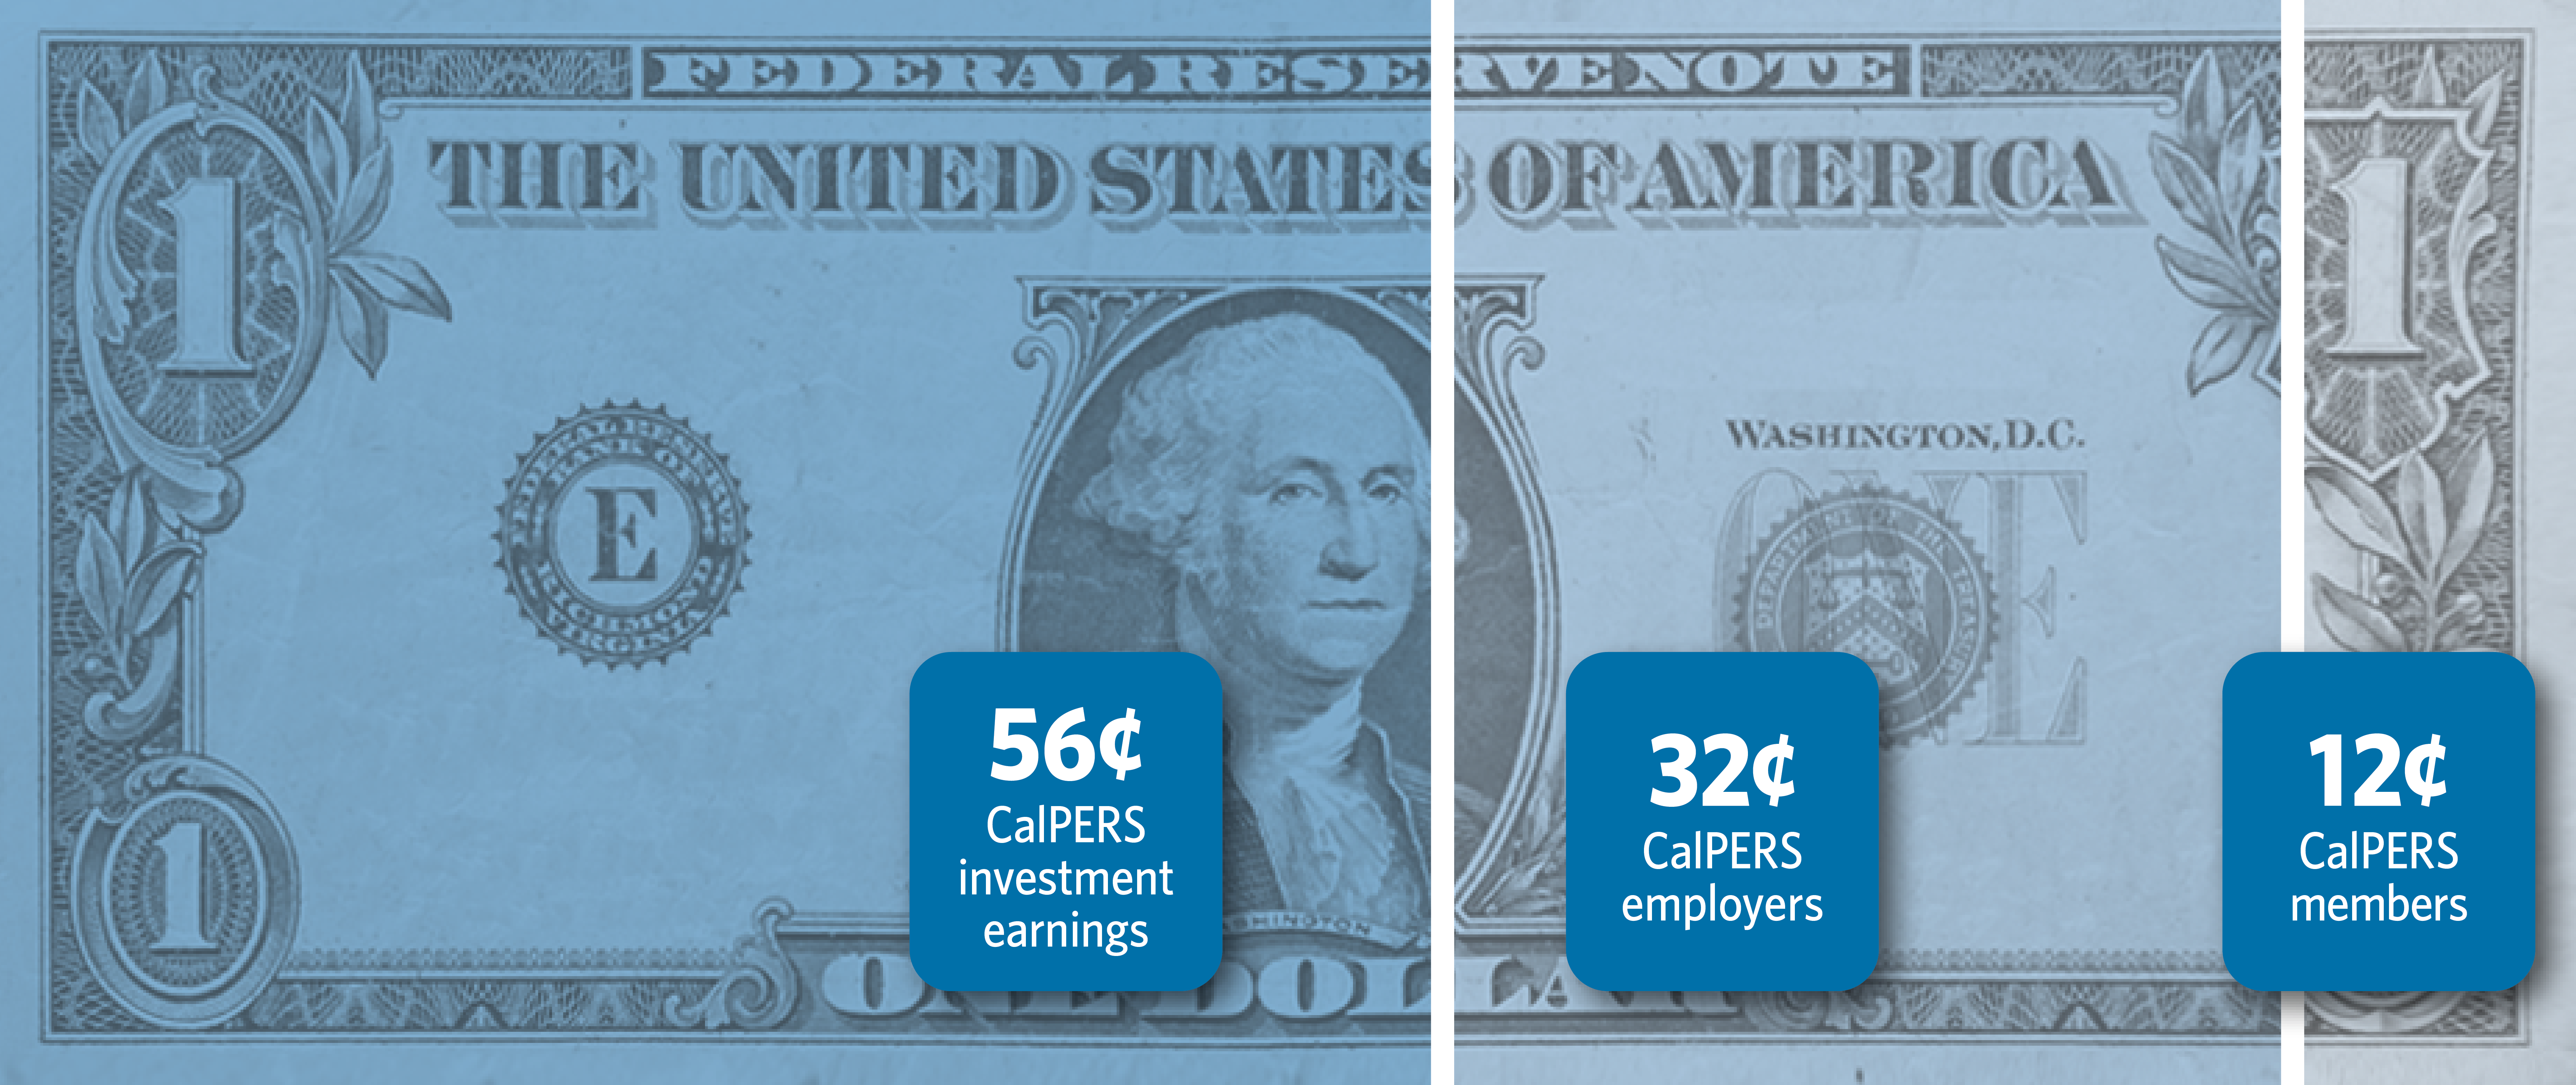 The CalPERS Pension Buck: 56 cents comes from CalPERS investment earnings, 32 cents comes from CalPERS employers, and 12 cents comes from CalPERS members